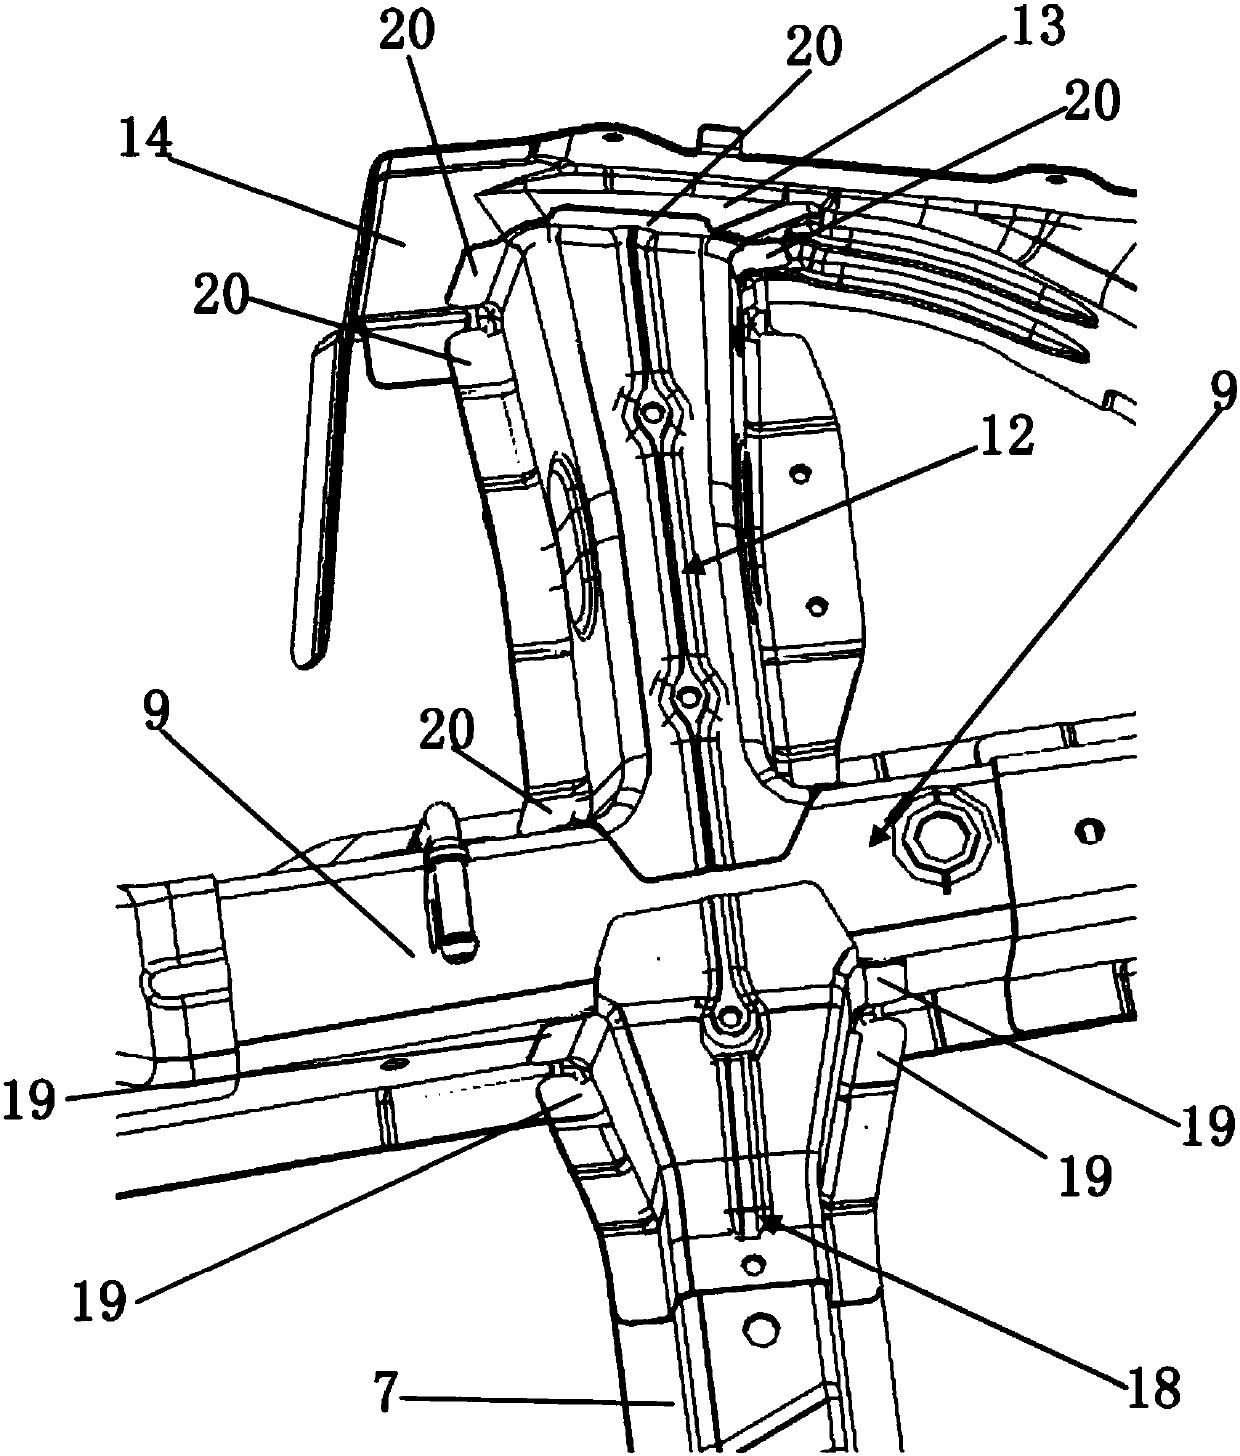 Rear frame assembly of vehicle body chassis